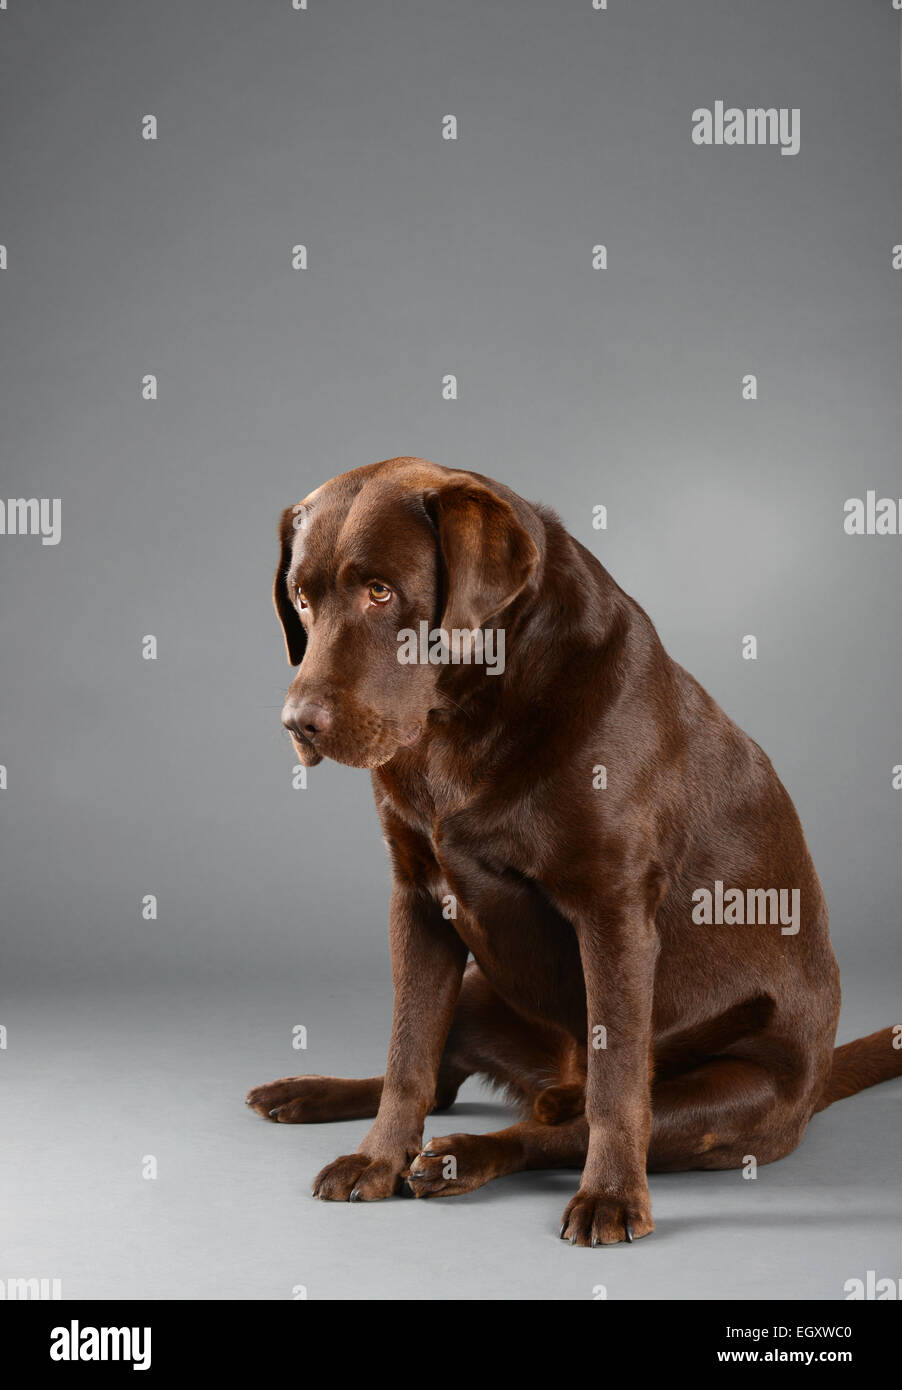 A brown chocolate Labrador dog looking sad and sitting on a gray background. Stock Photo